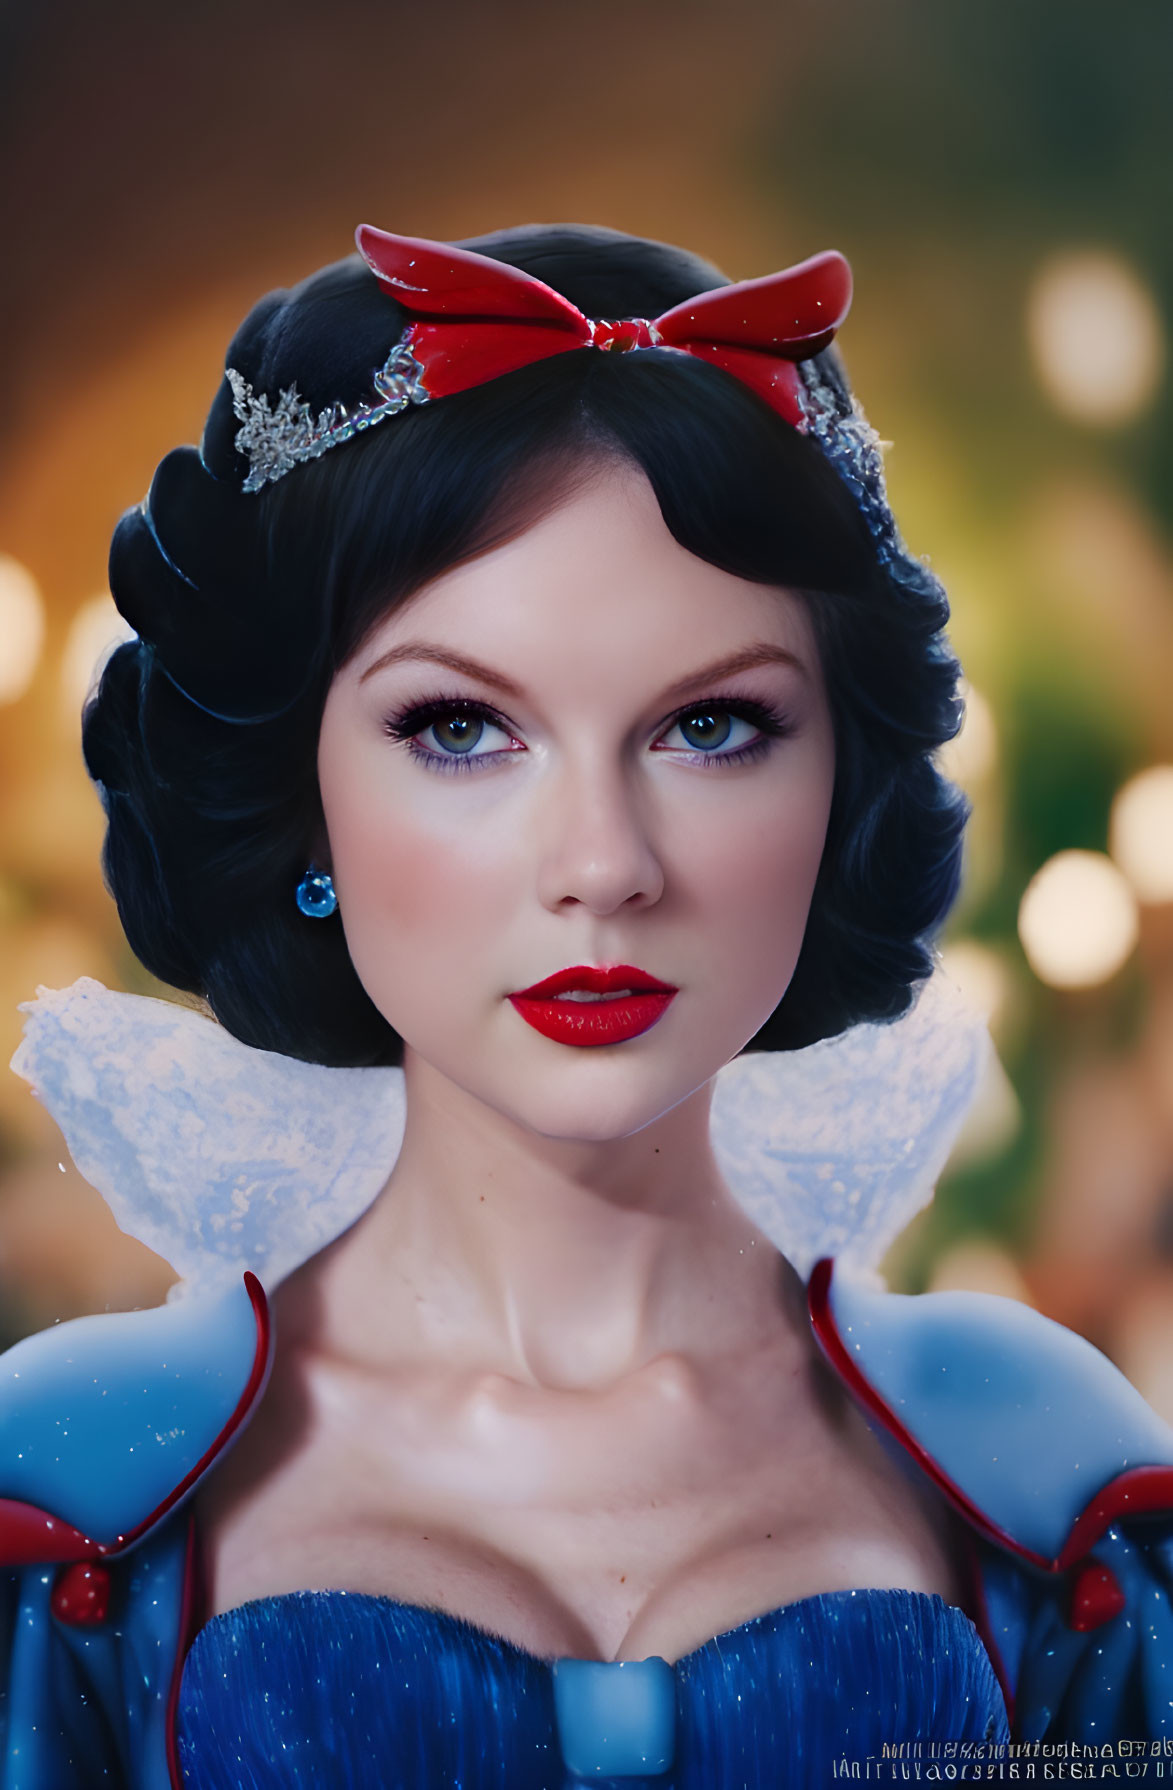 ANDRE´S ART TAYLOR SWIFT AS PRINCESS SNOW WHITE